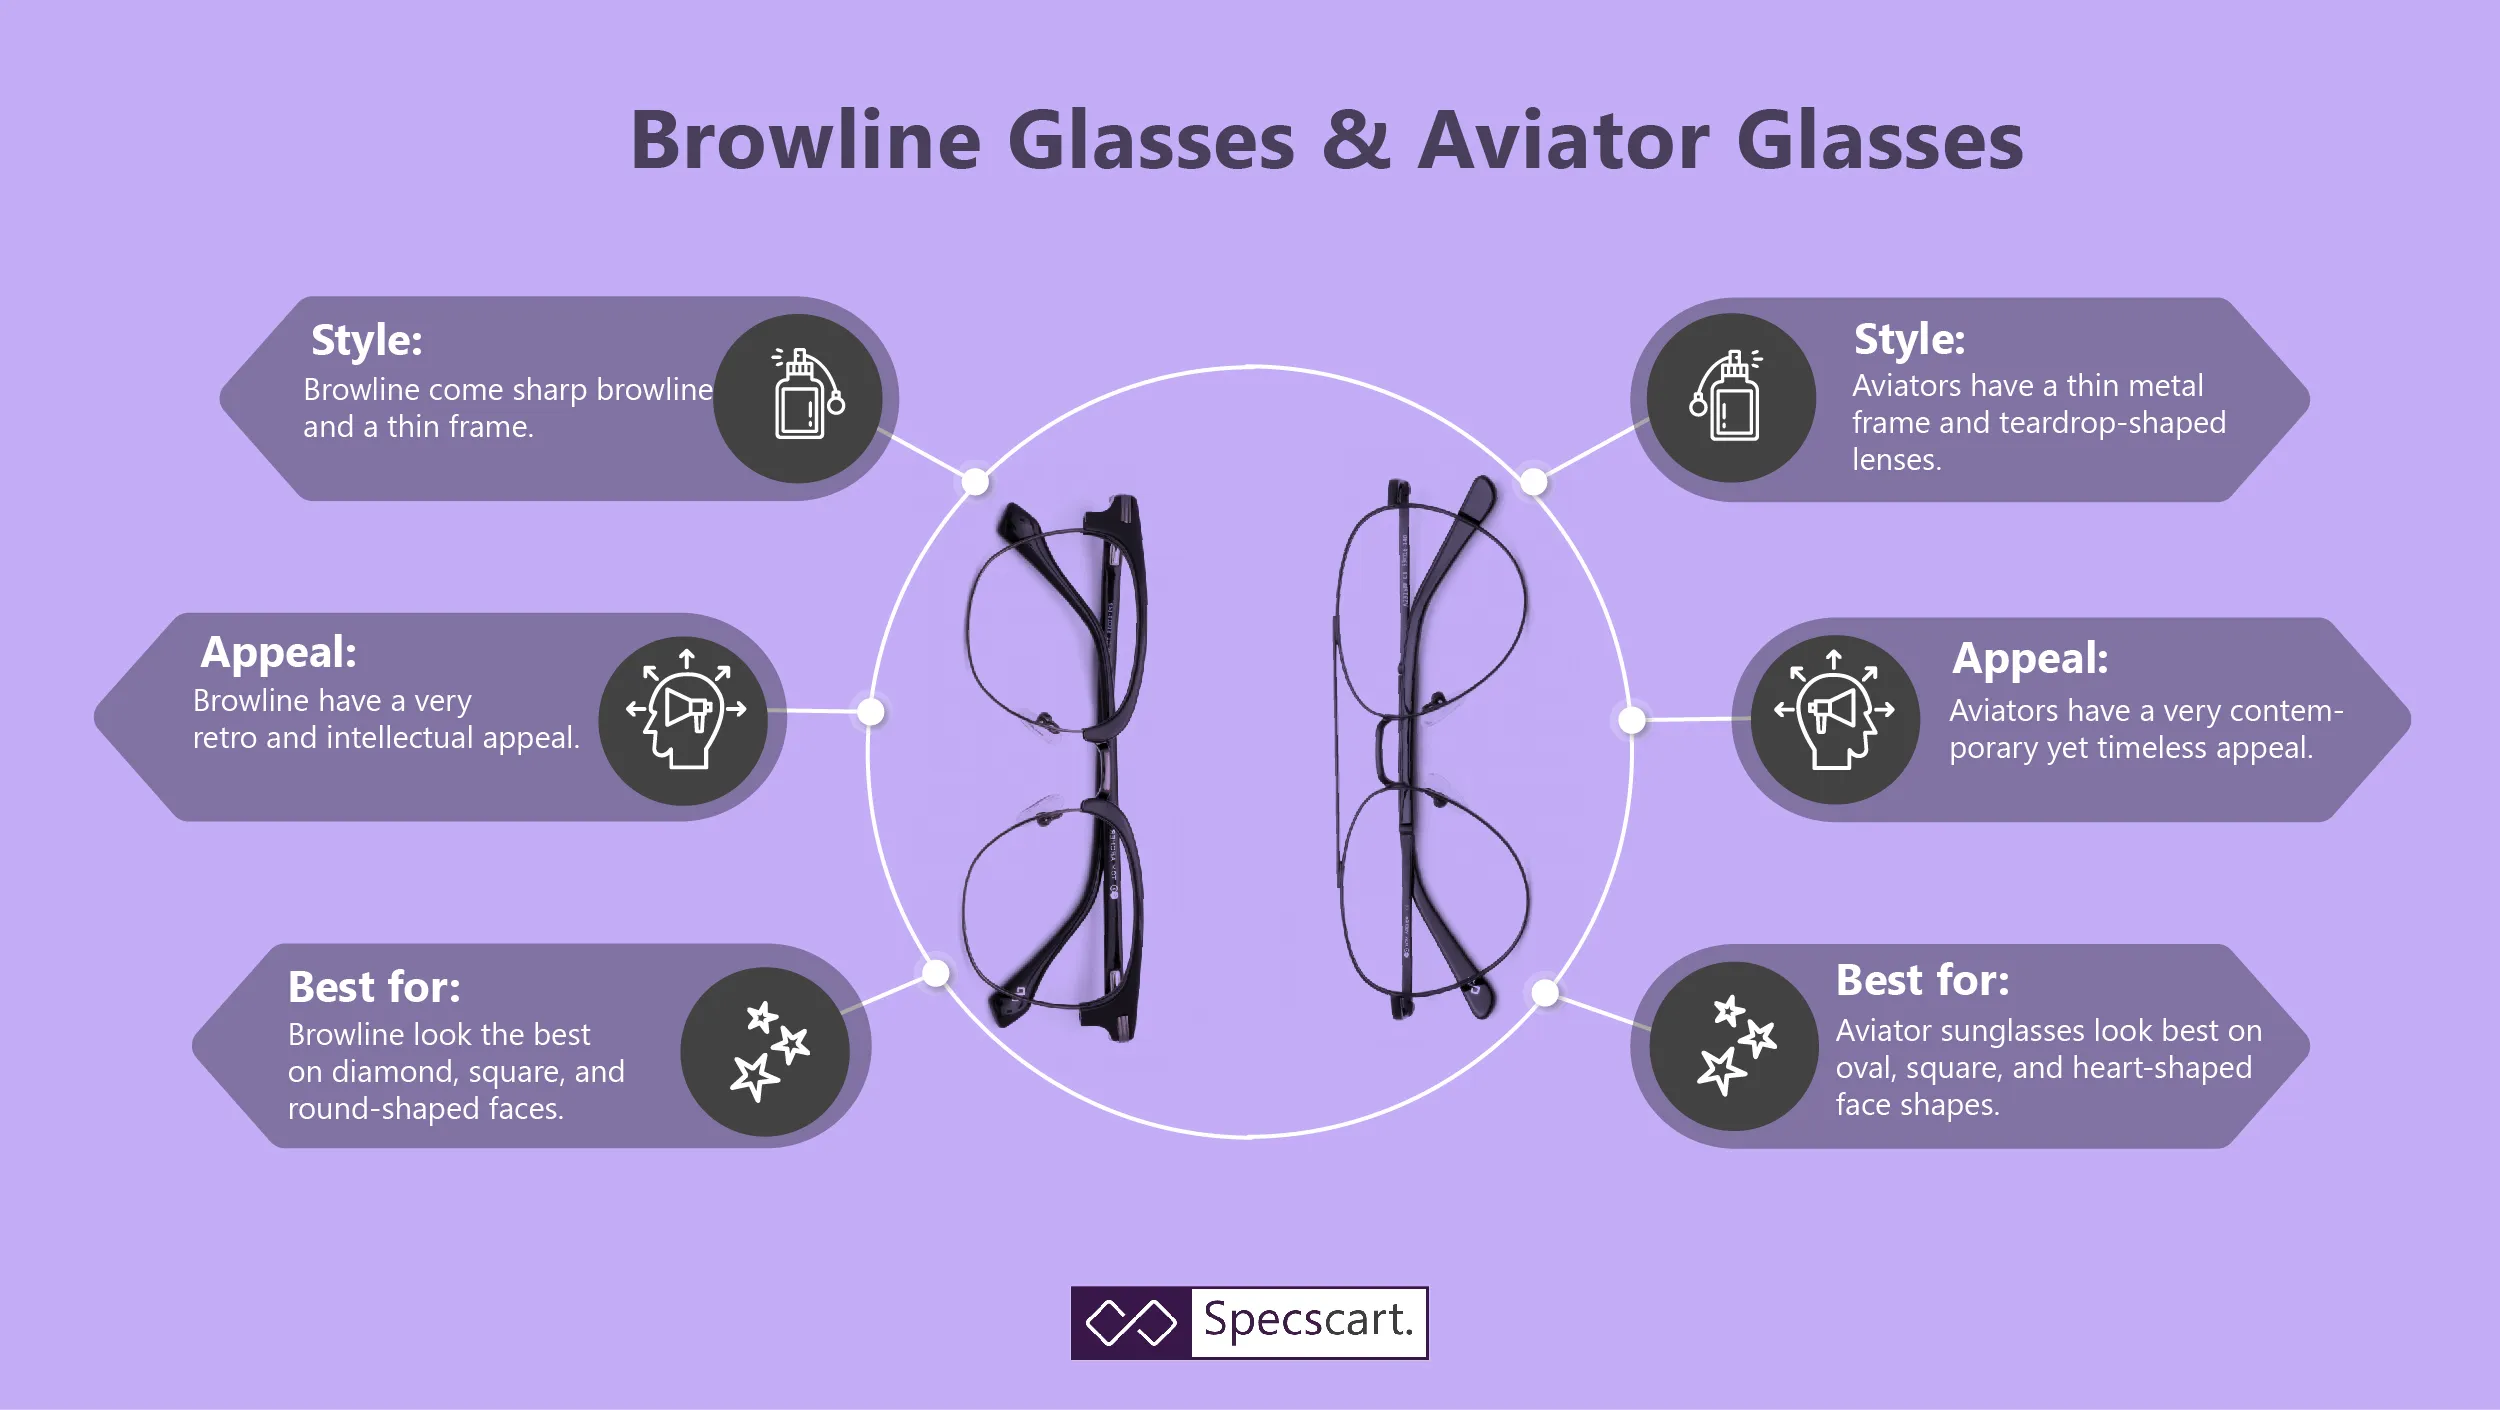 Buy Best-quality Aviator and Browline Glasses